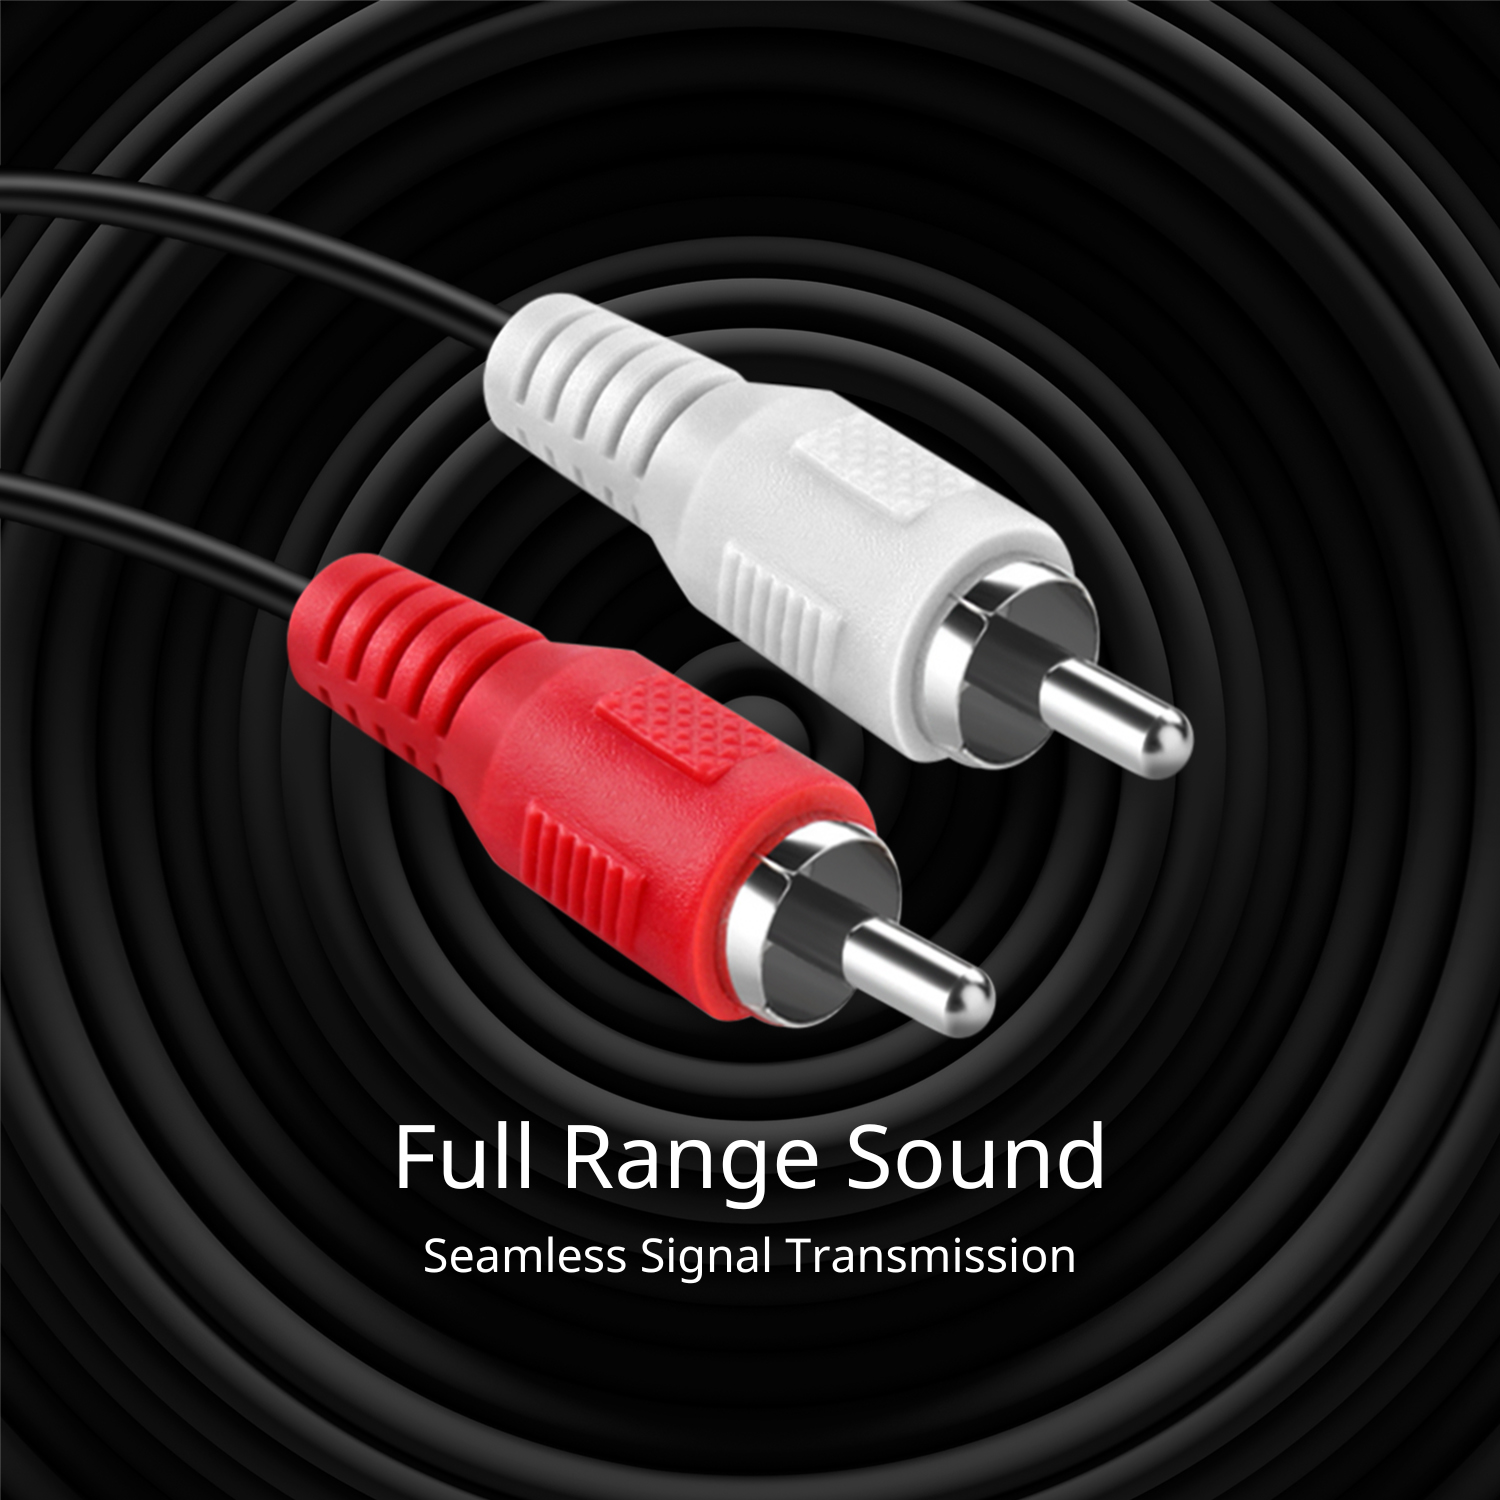 2RCA Stereo Audio Cable (15 Feet) - Dual Composite RCA Male Connector M/M 2 Channel (Right and Left) (Red and White) Shielded 2RCA to 2RCA AV Sound Plug Jack Wire Cord - image 4 of 6